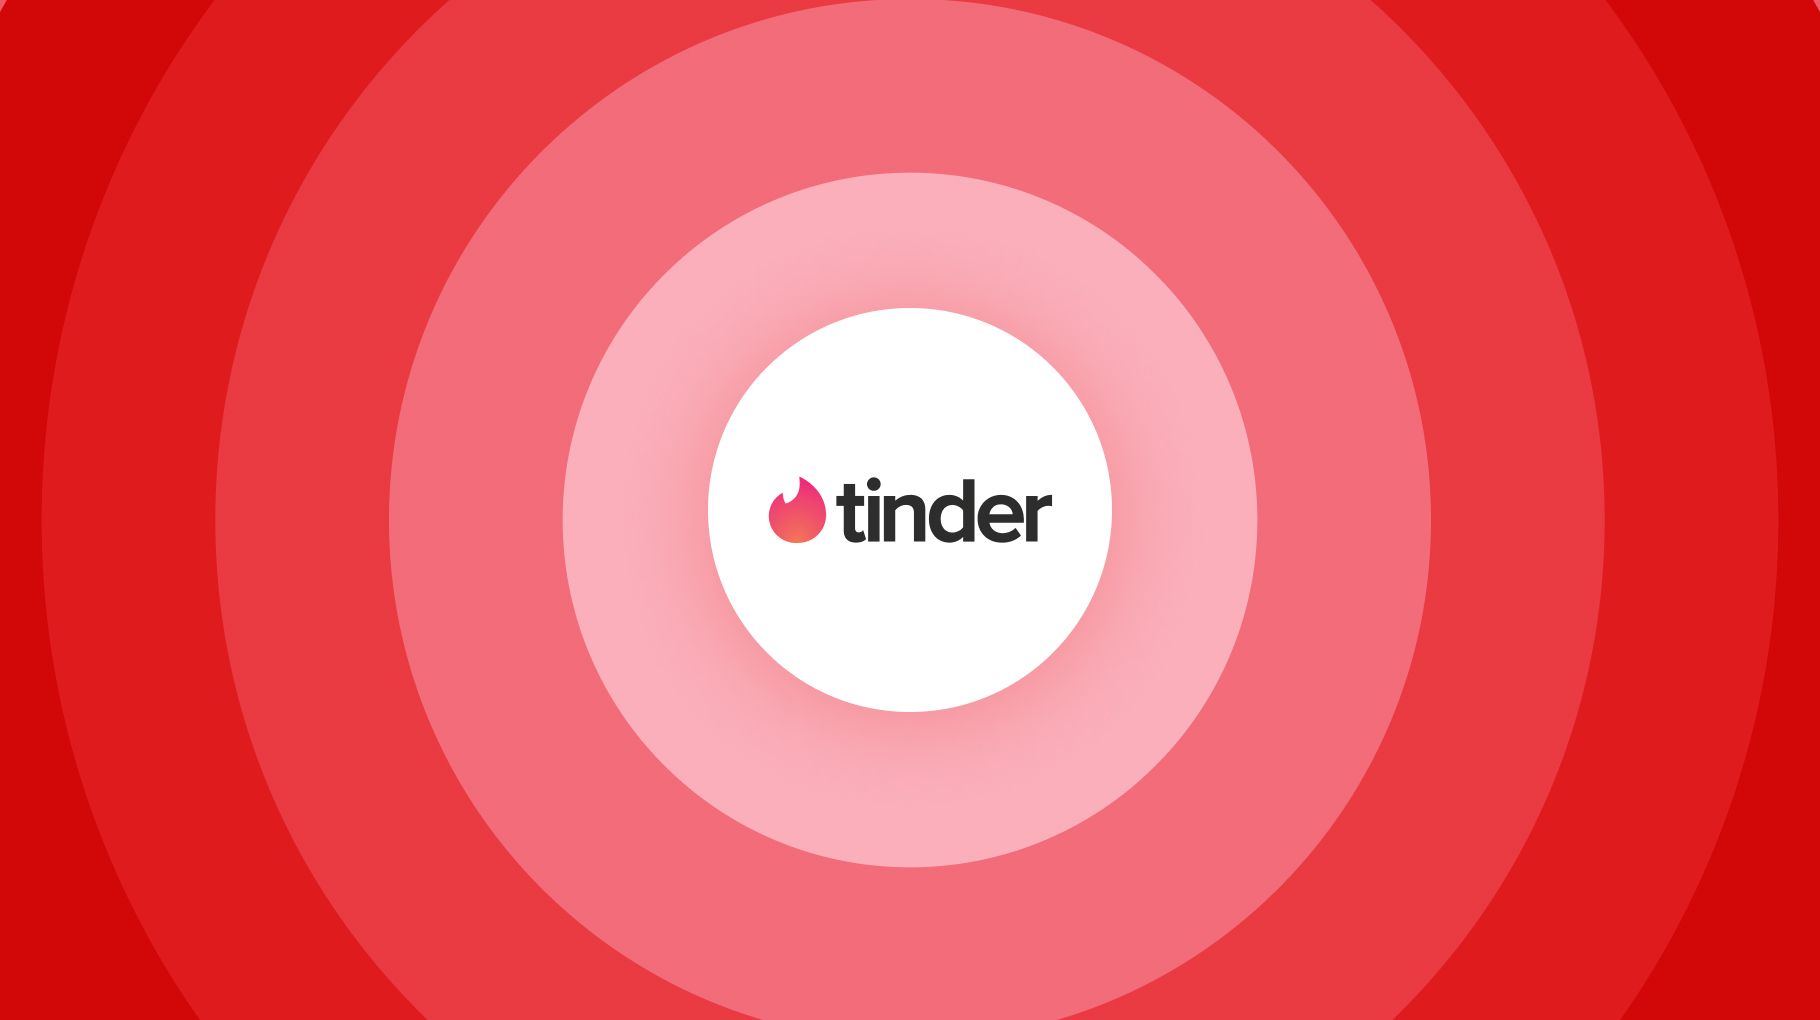 Tinder - Everything You Need to Know